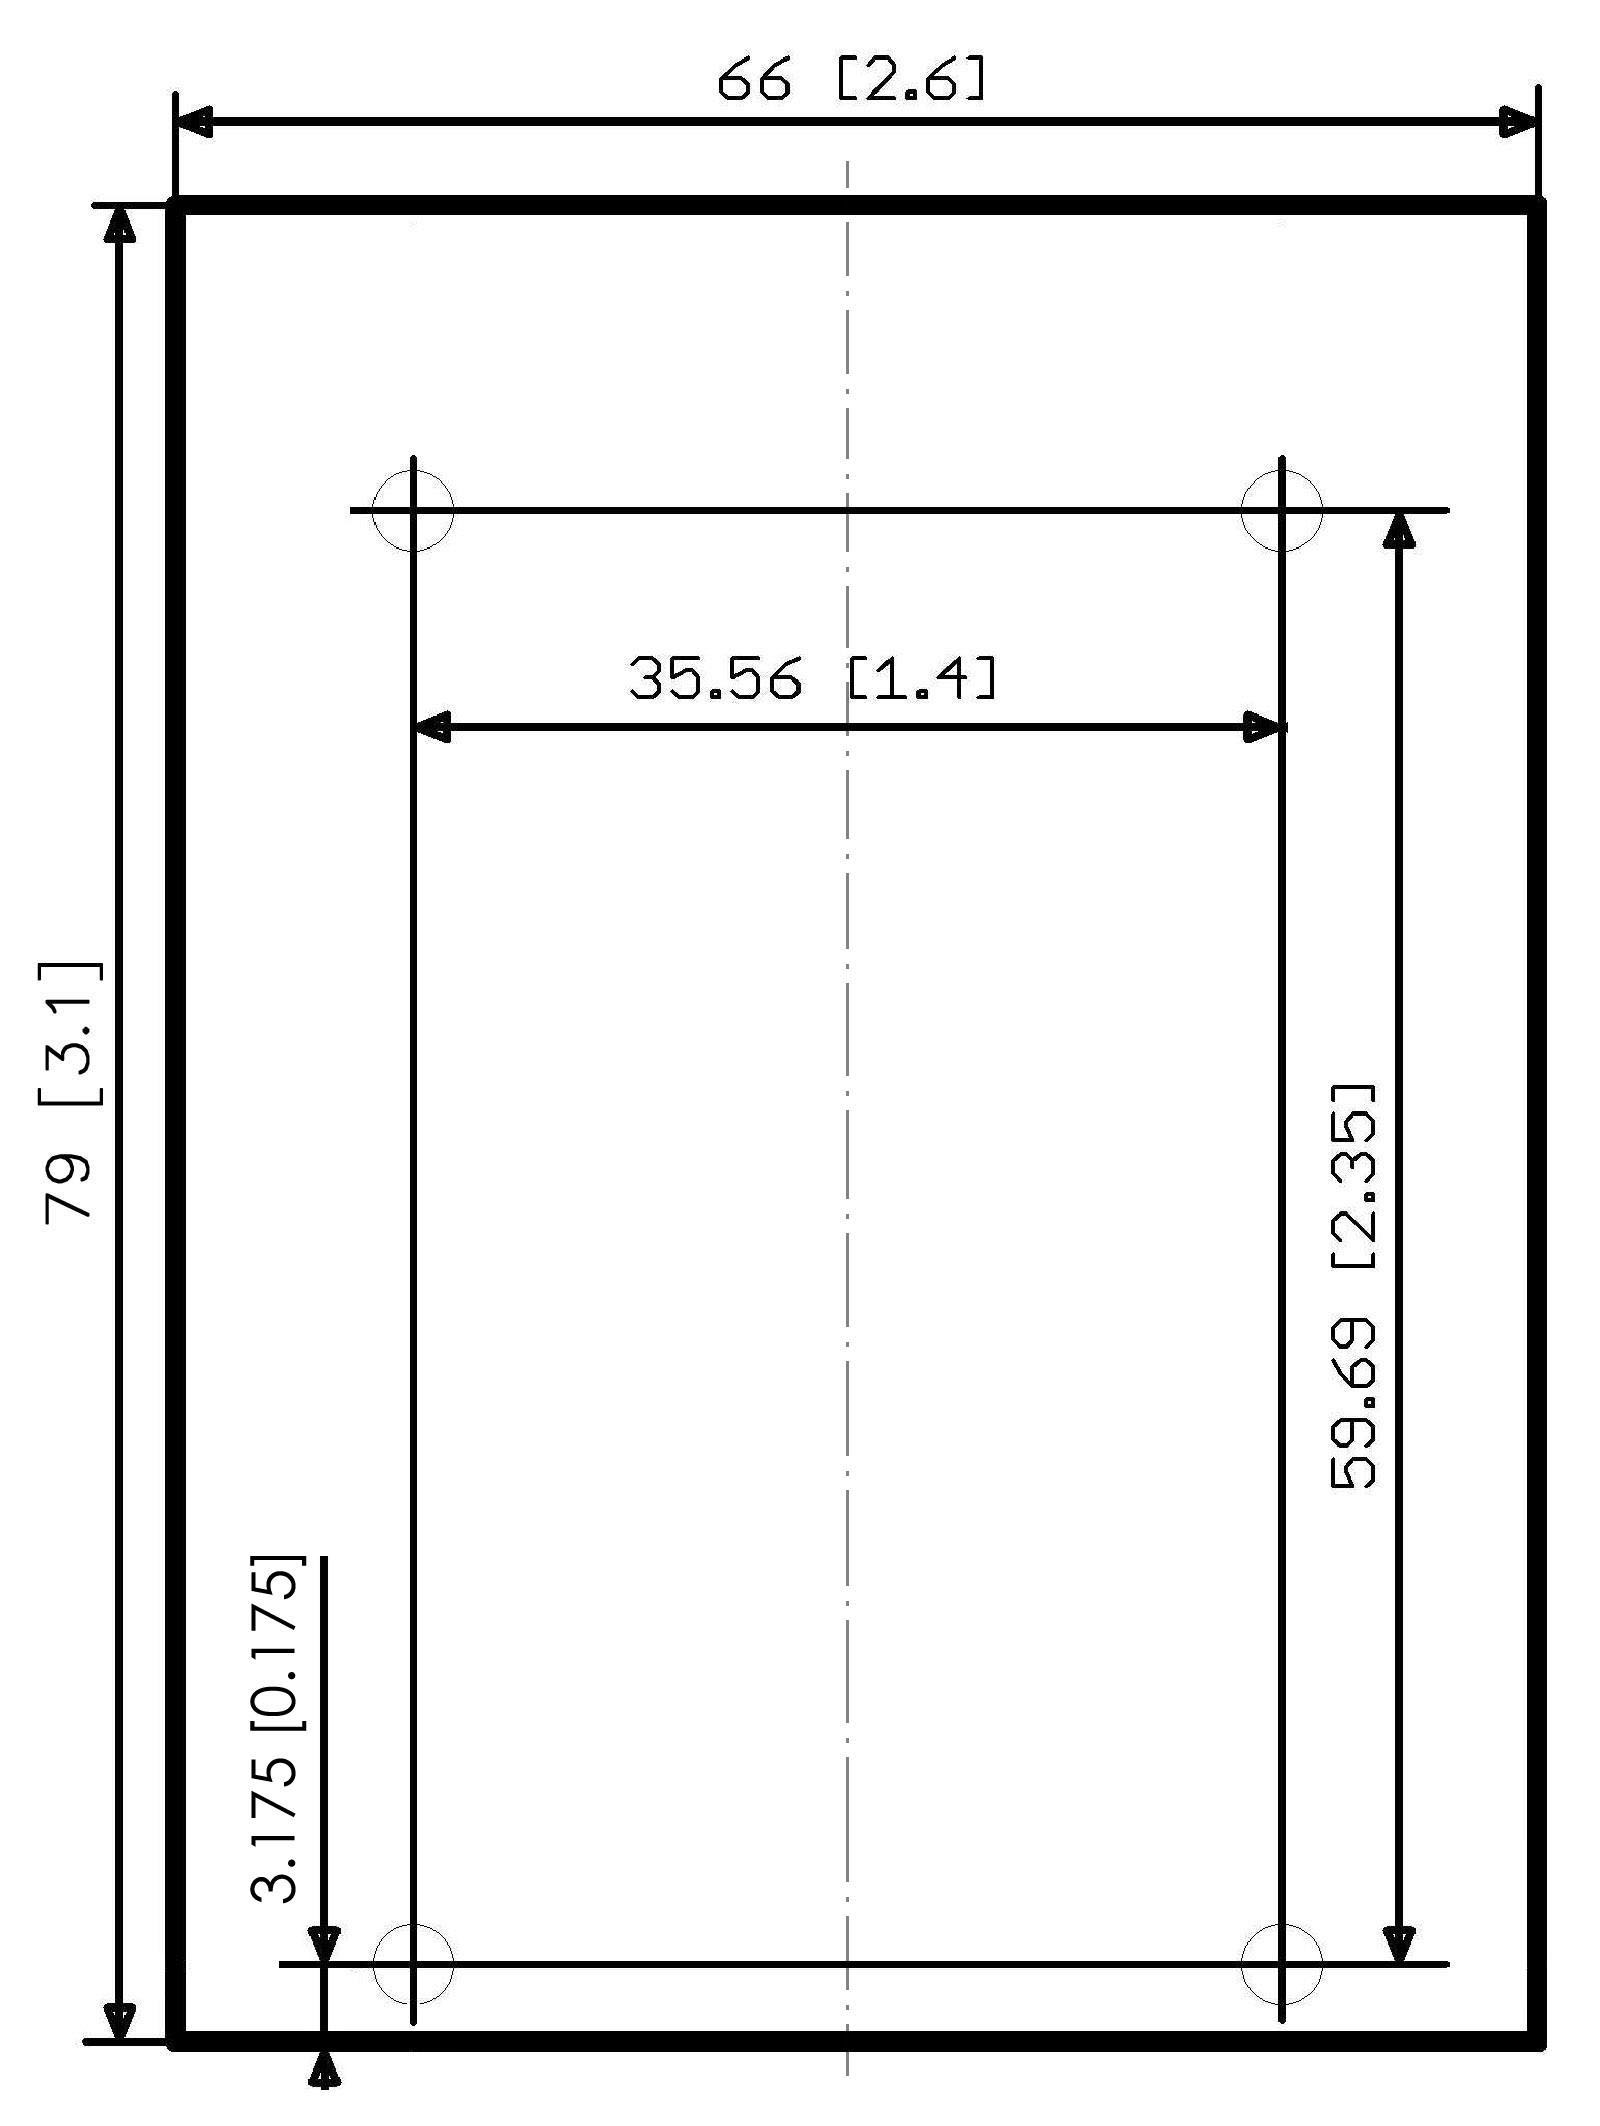 OR-extended-PCB-Dimensions.jpg